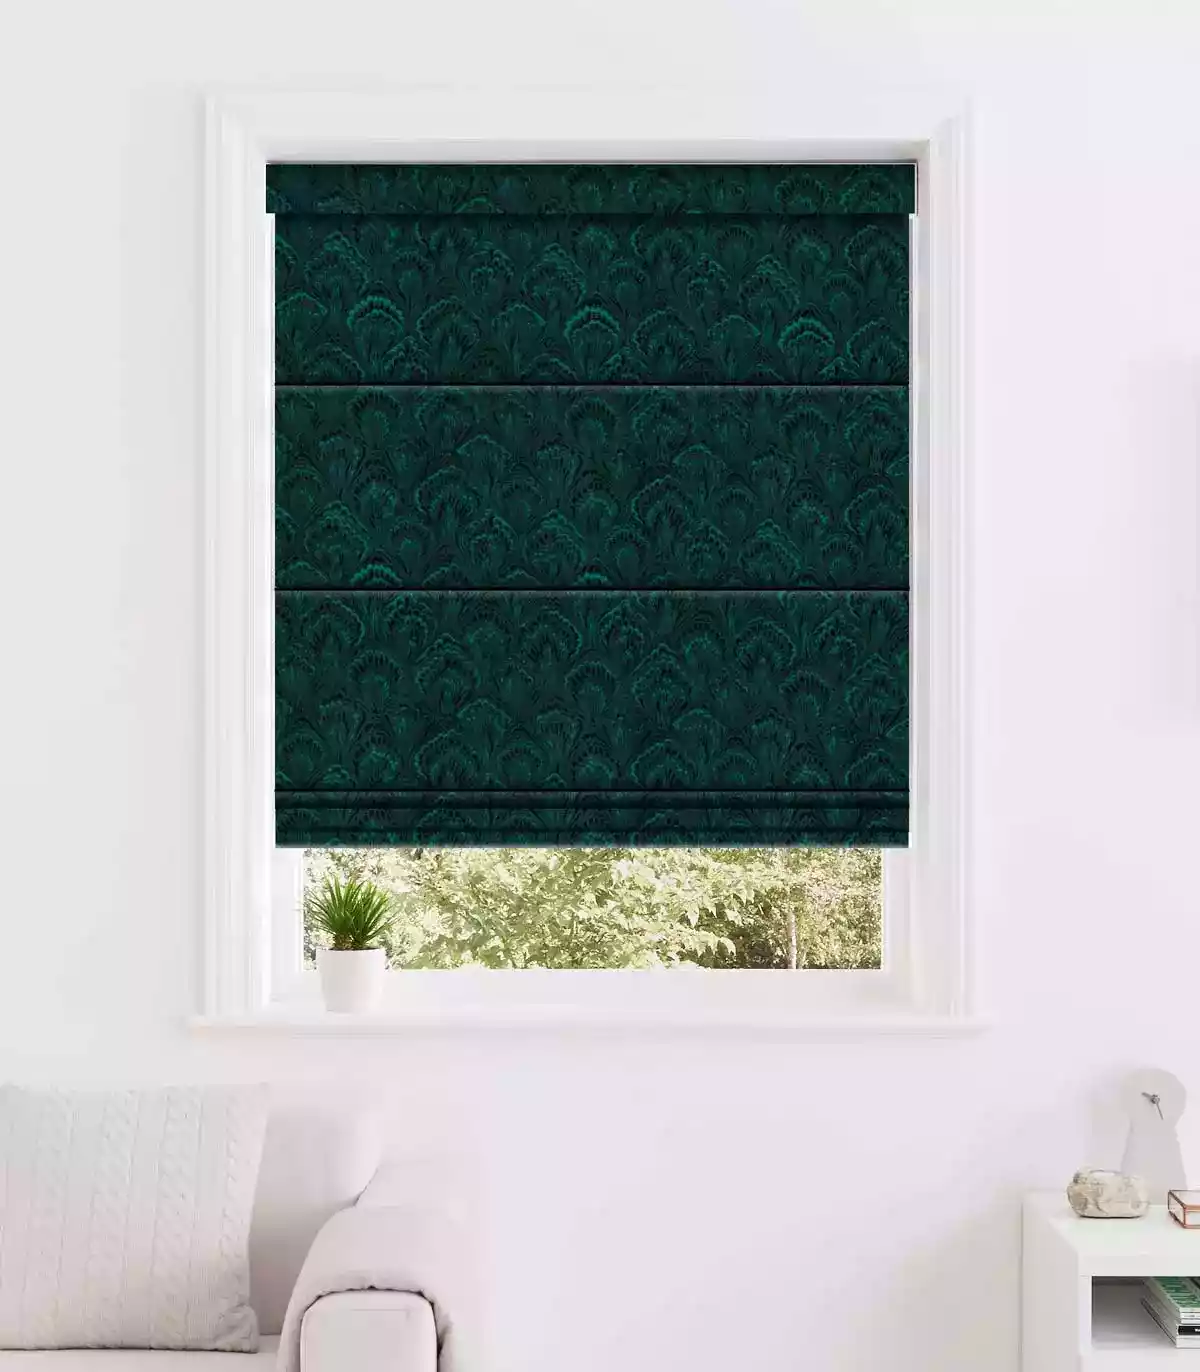 Feathers peacock romex blinds